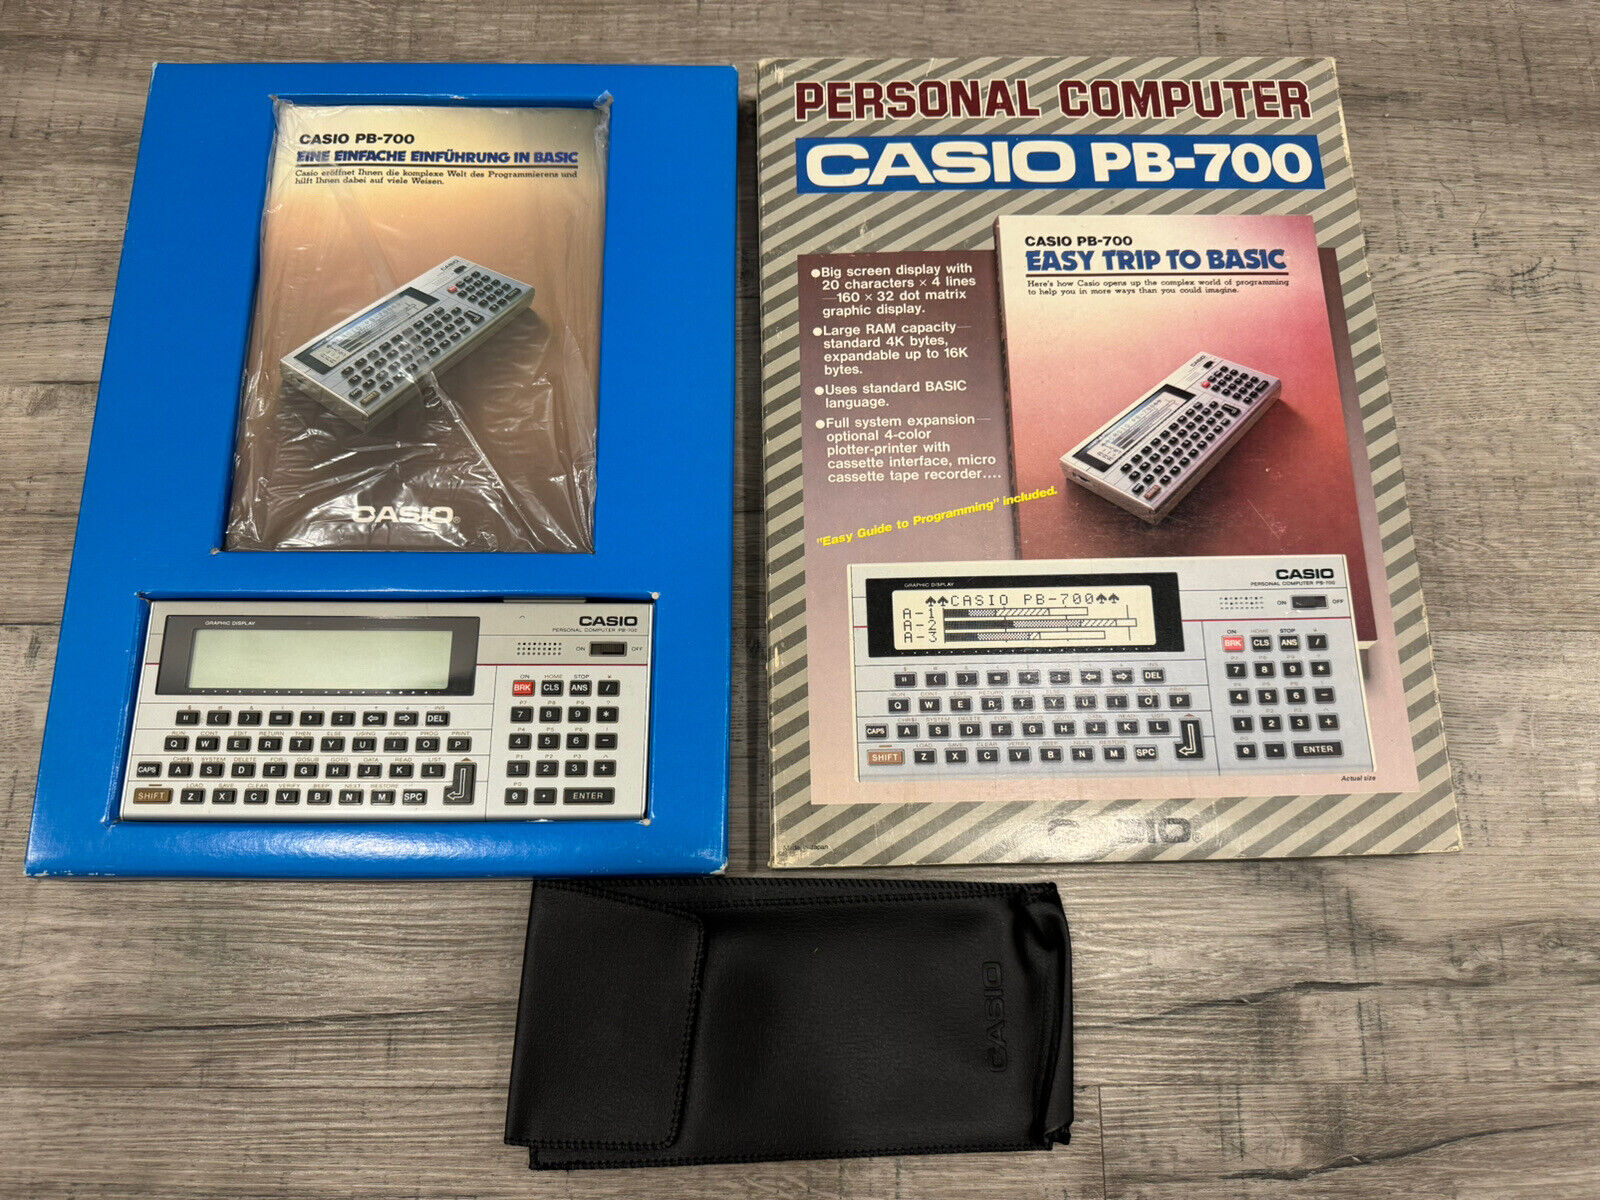 Vintage Casio PB-700 Personal Computer - With Original Box - Tested & Working